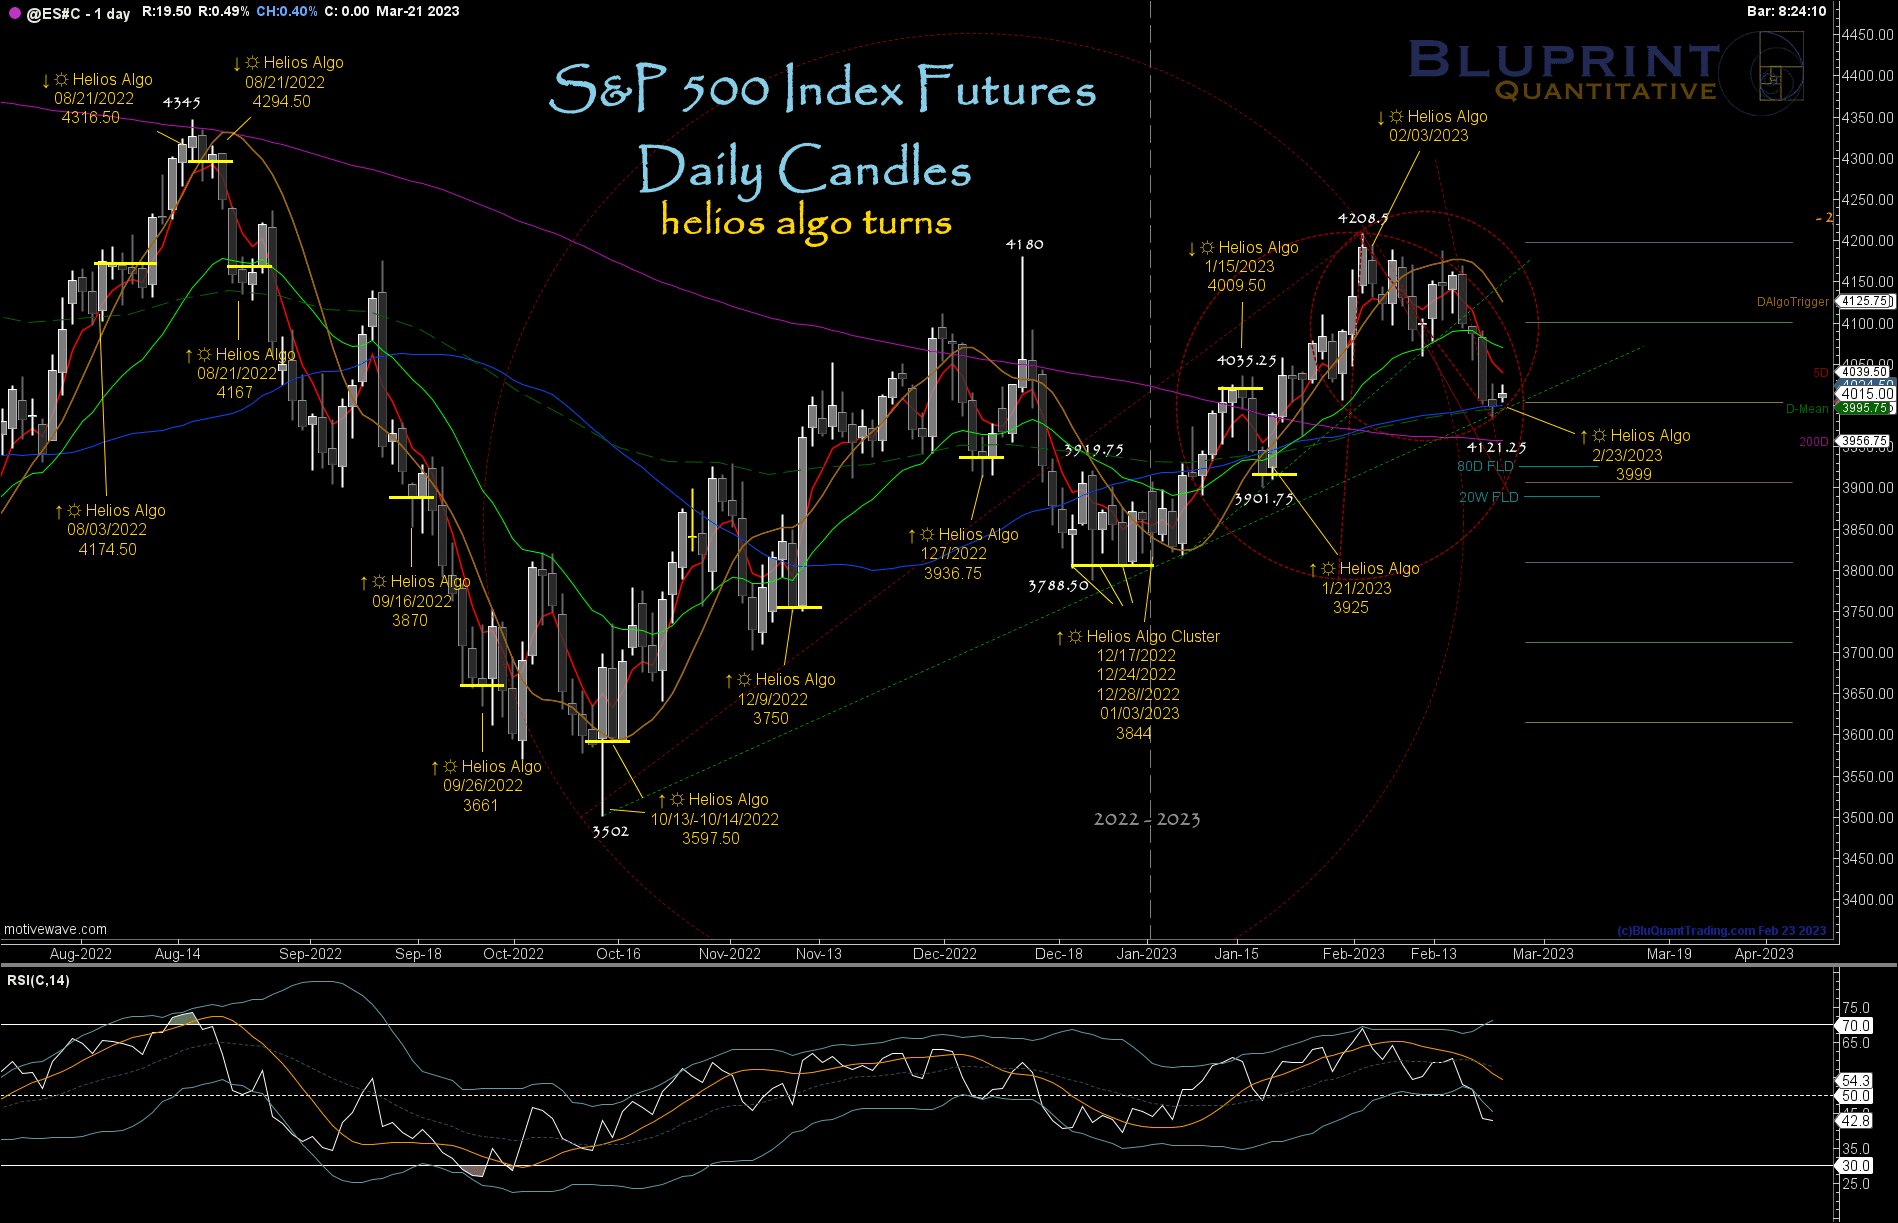 S&P 500 Index Futures Daily Candles - Proprietary Helio Algorithm Buy and Sell Signals (click to enlarge).